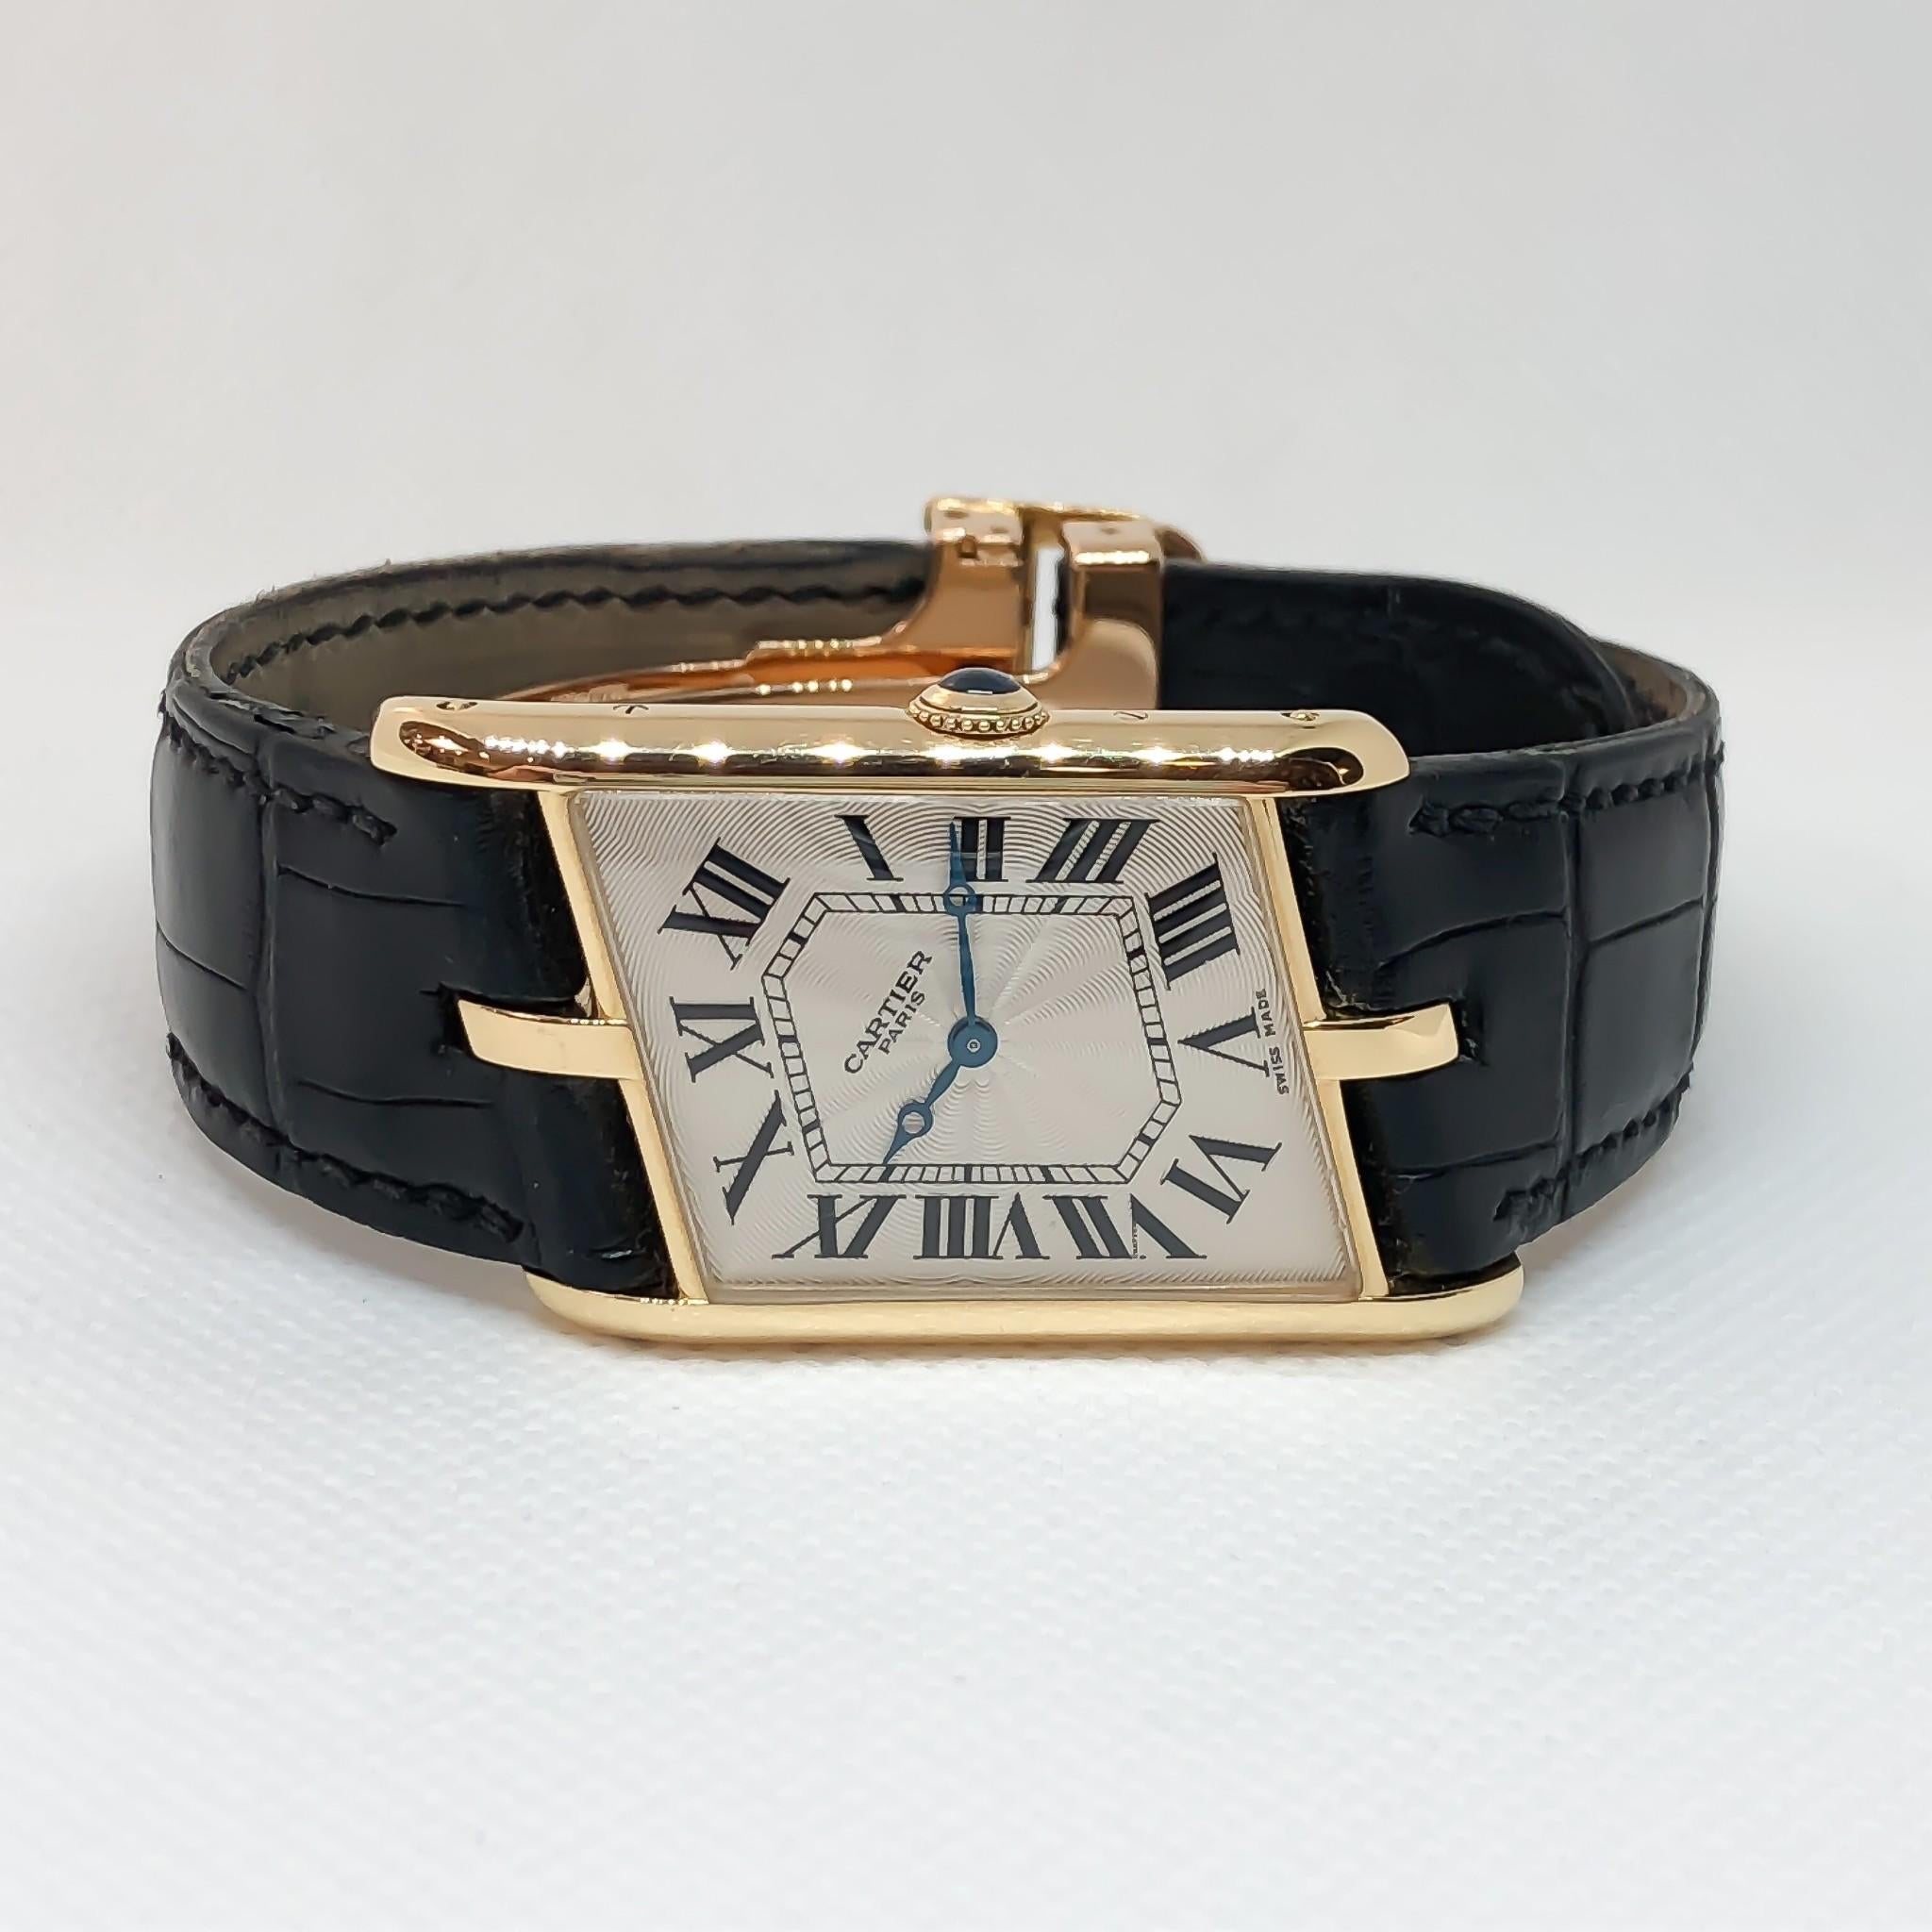 Limited edition and extremely rare men's Cartier Asymmetrical Tank. Only 250 produced by Cartier. This model is engraved #121 of 250 on the case back. Excellent condition and comes with original box, no papers. 

•REFERENCE NO: 2842
•MOVEMENT: